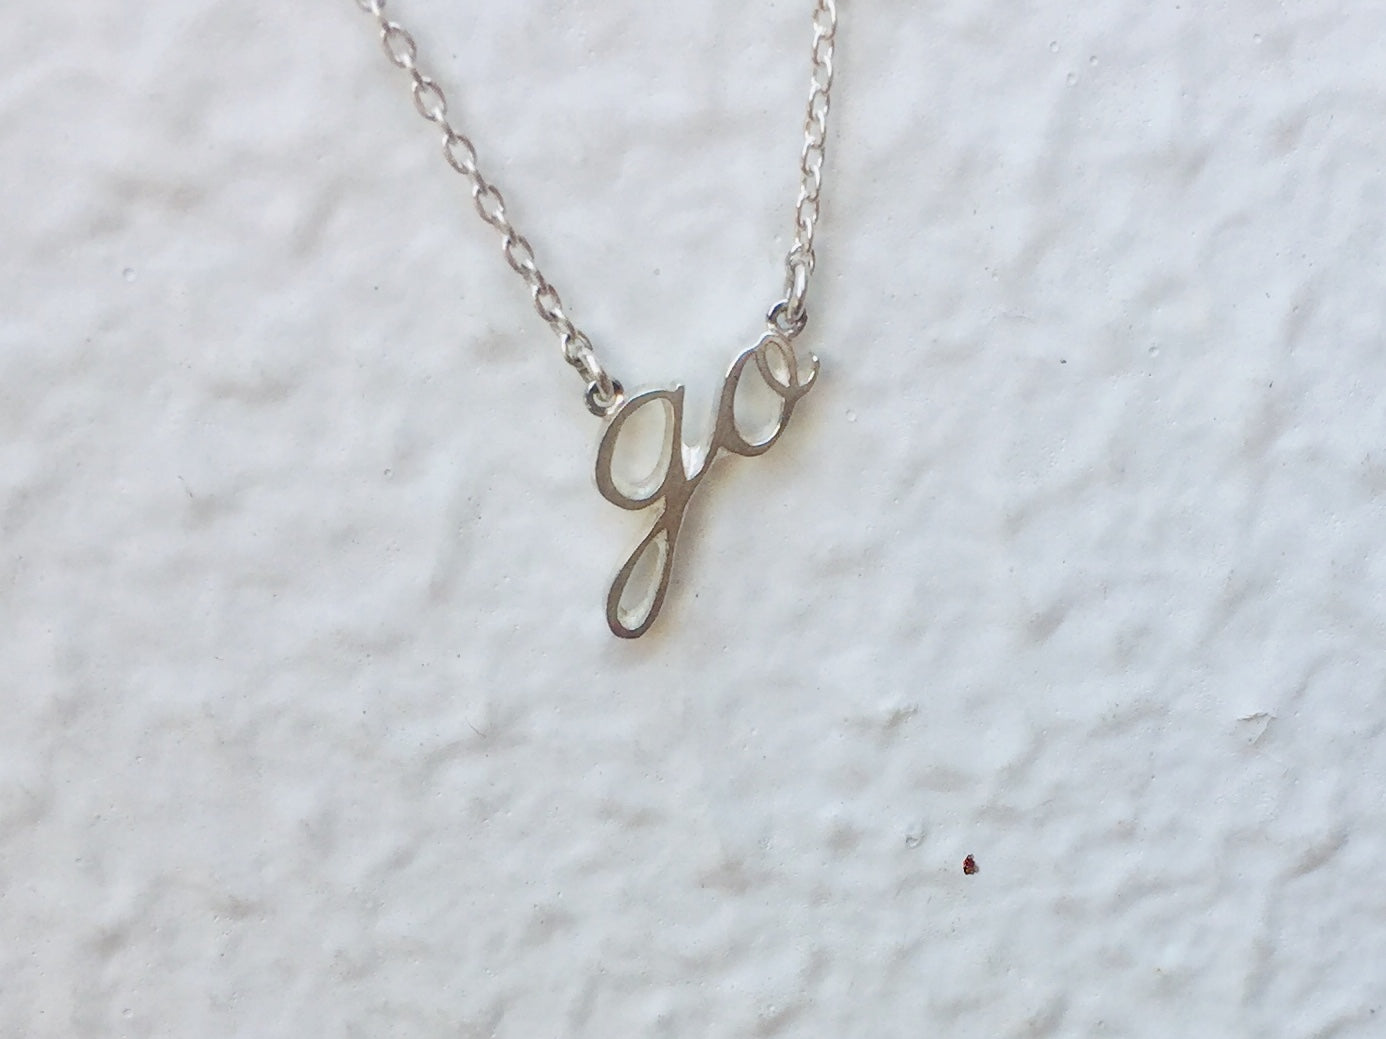 Sterling Silver925 "GO" Pendant & Silver Necklace Chain シルバー・筆記体・オトナ・ネックレス